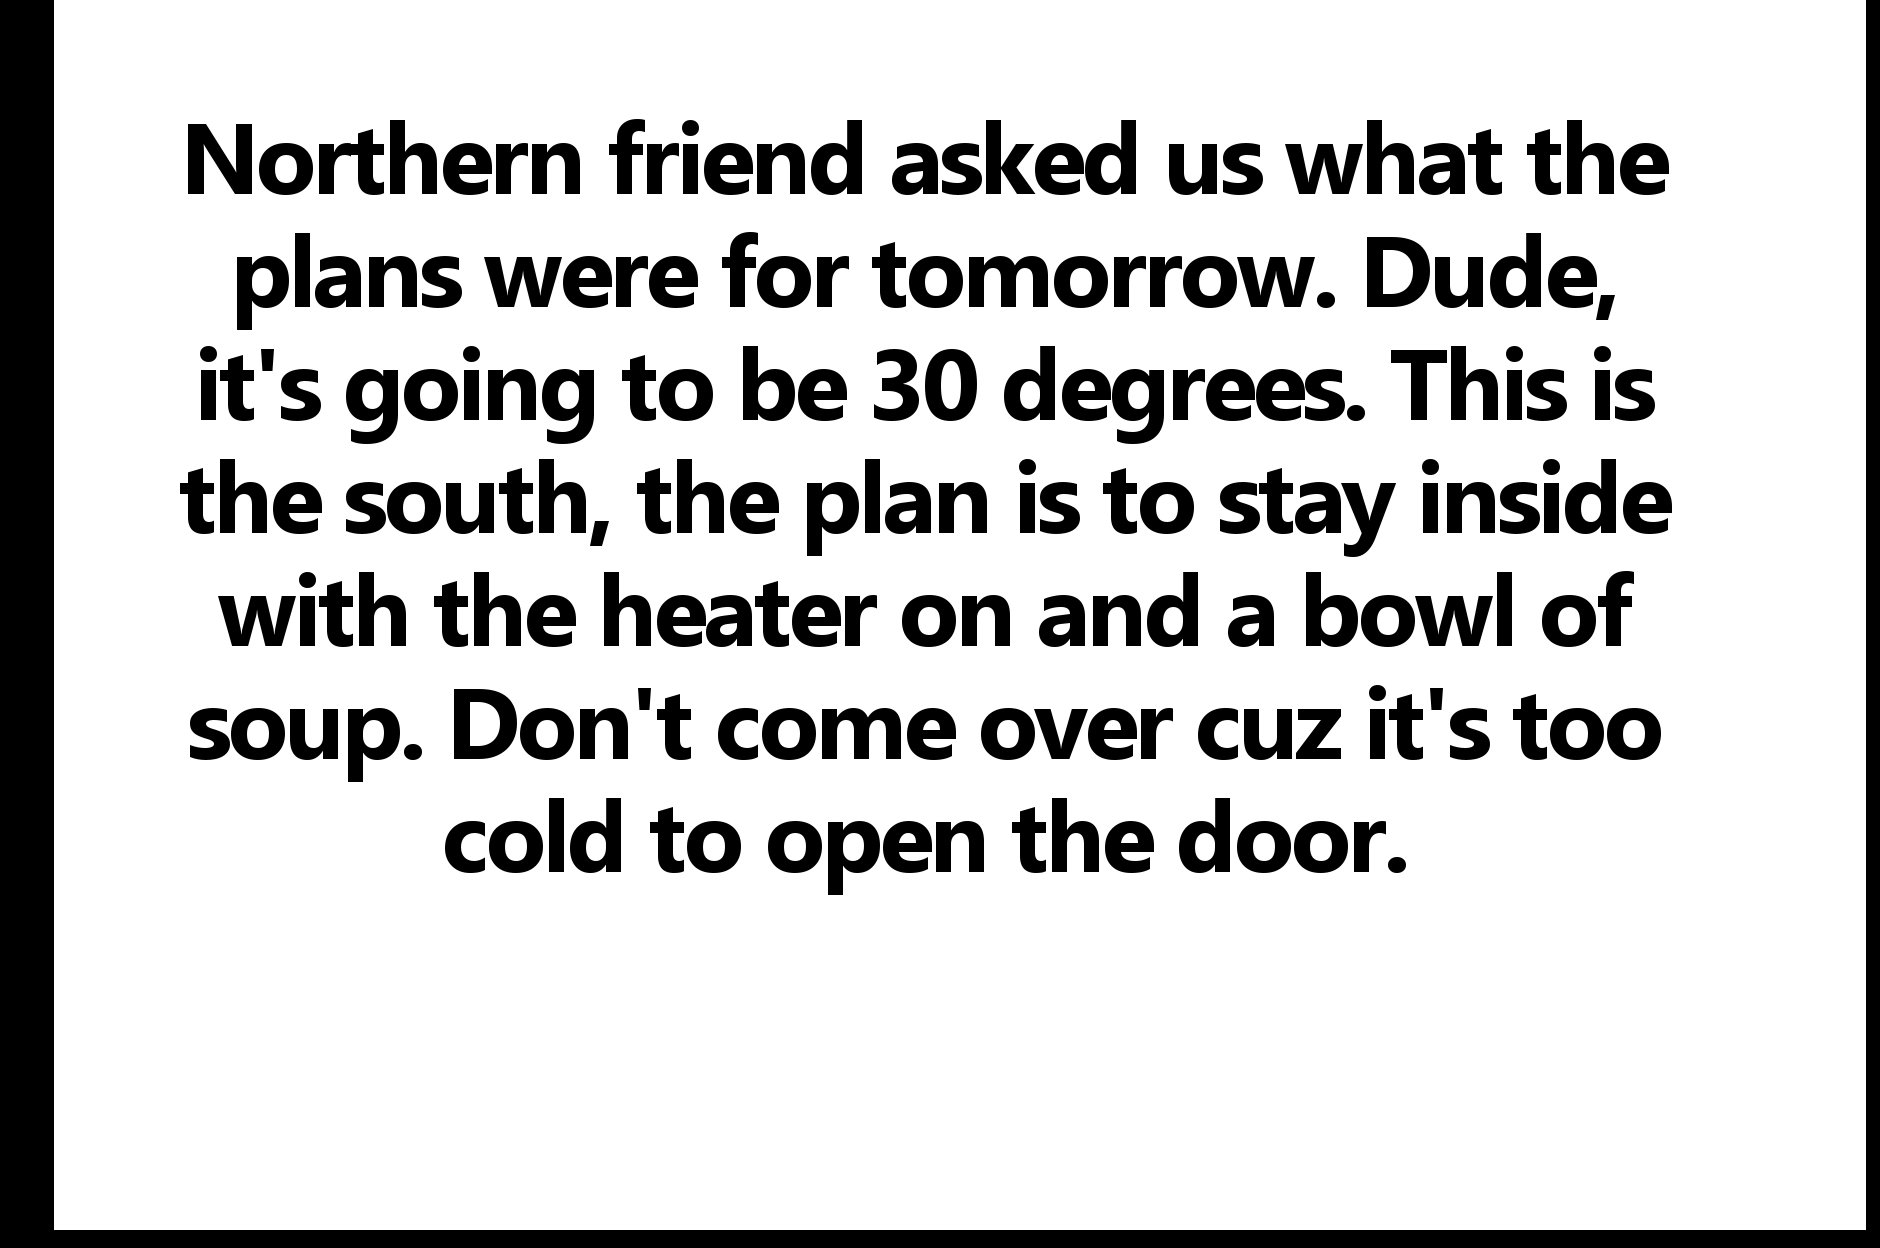 nursing quote - Northern friend asked us what the plans were for tomorrow. Dude, it's going to be 30 degrees. This is the south, the plan is to stay inside with the heater on and a bowl of soup. Don't come over cuz it's too cold to open the door.